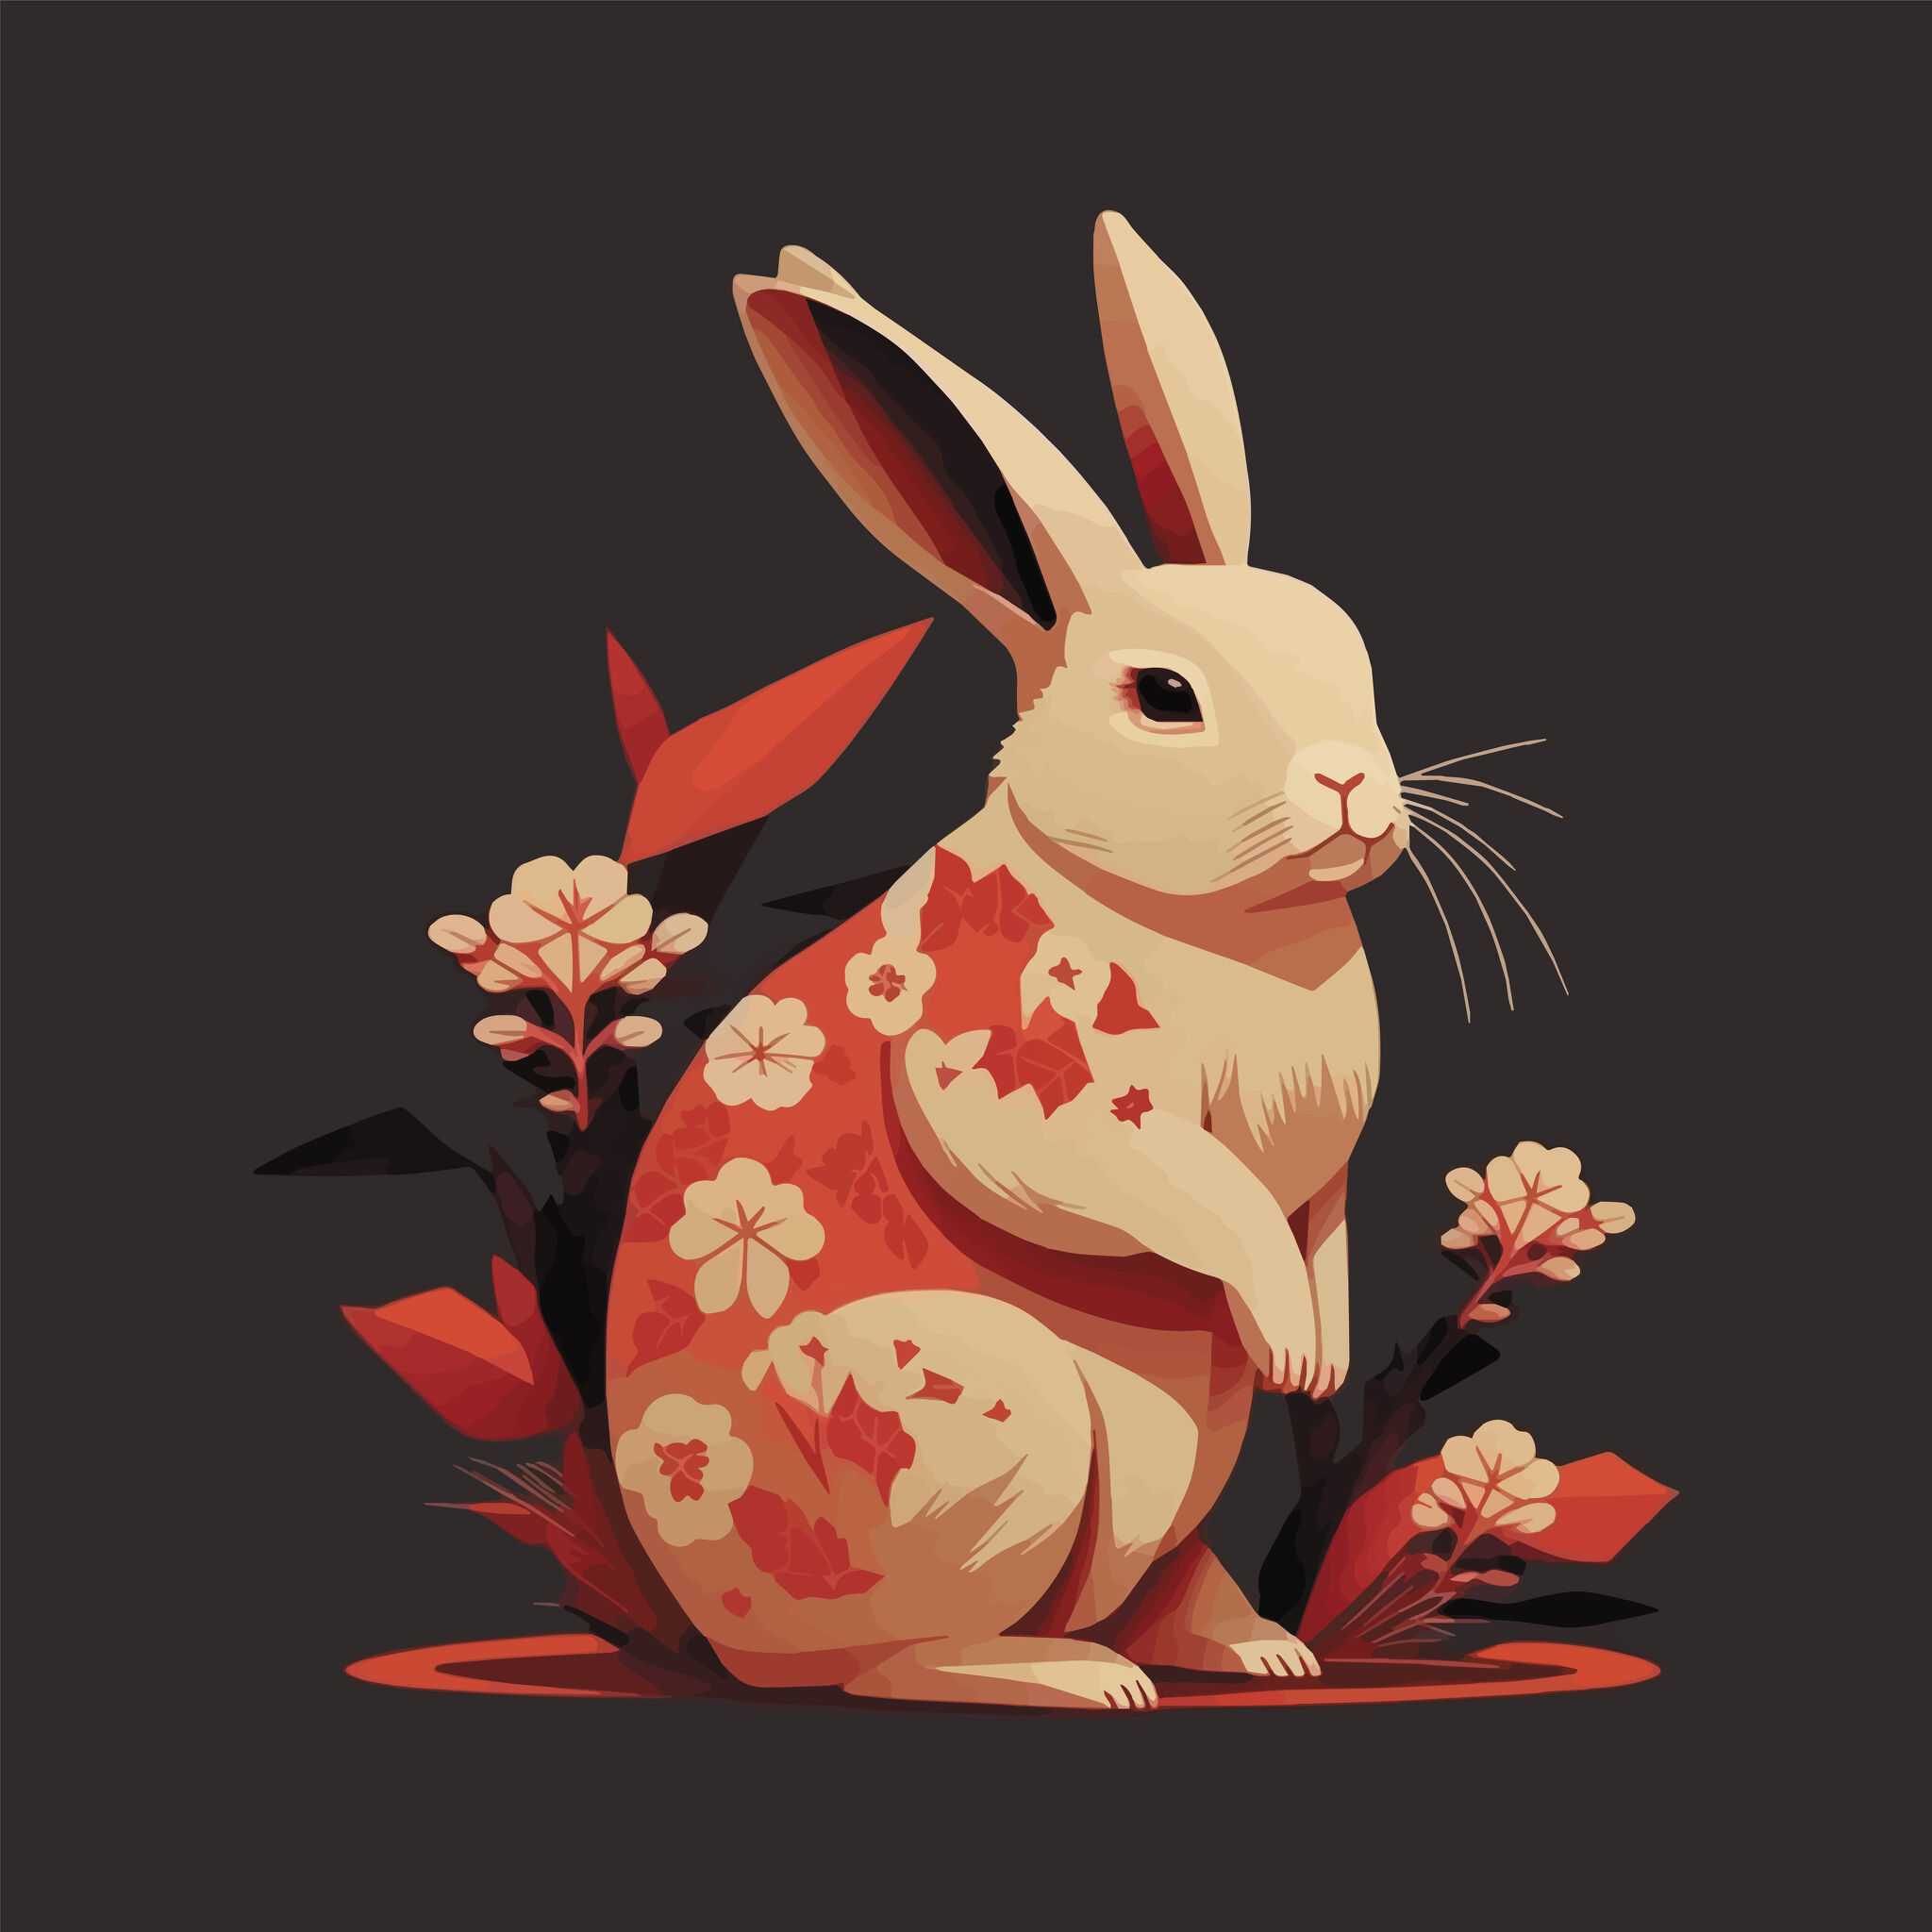 What's ahead in the Year of the Rabbit? Serenity